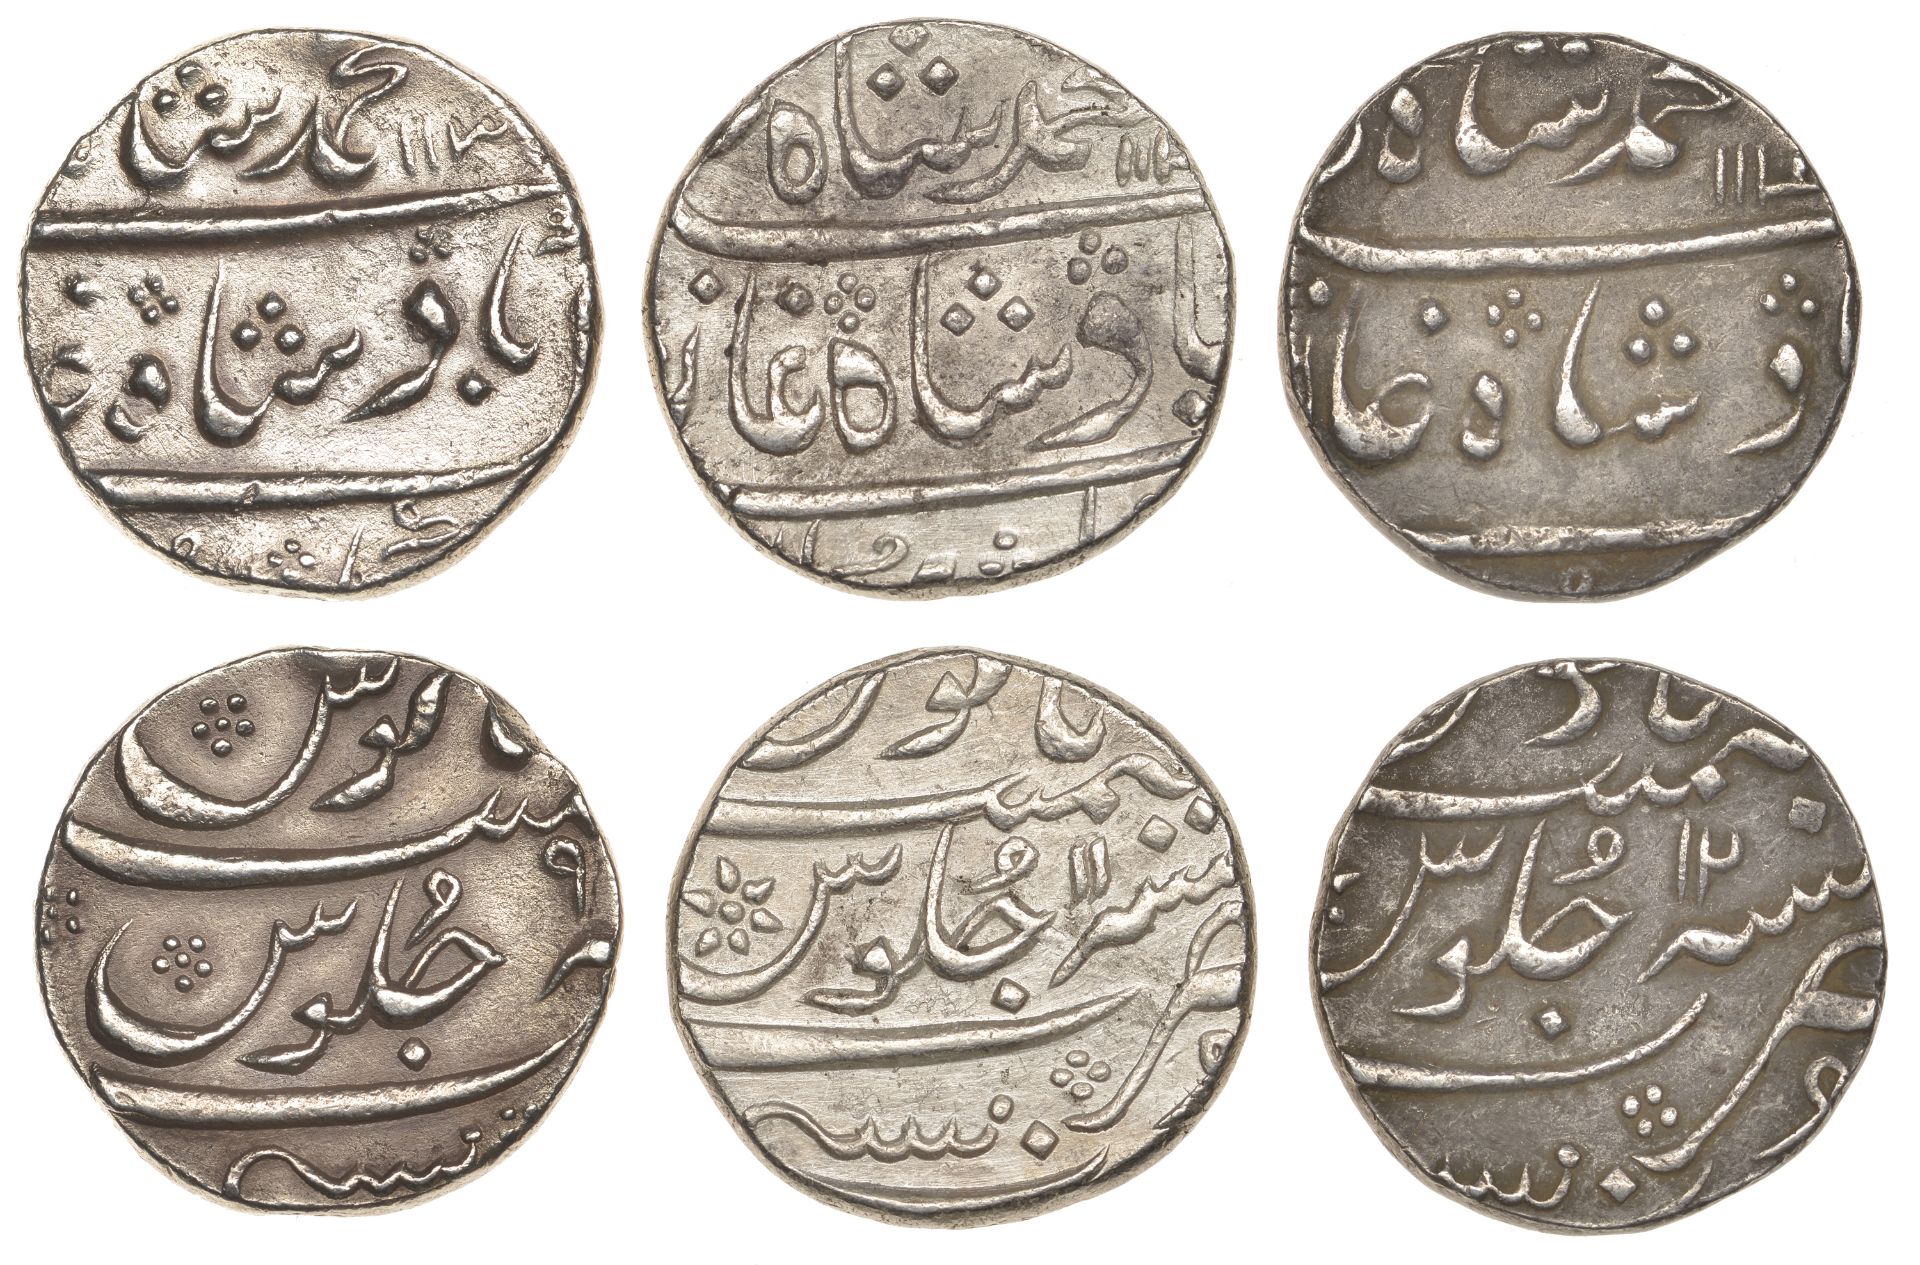 East India Company, Bombay Presidency, Early coinages: Mughal style, silver Rupees (3), in t...